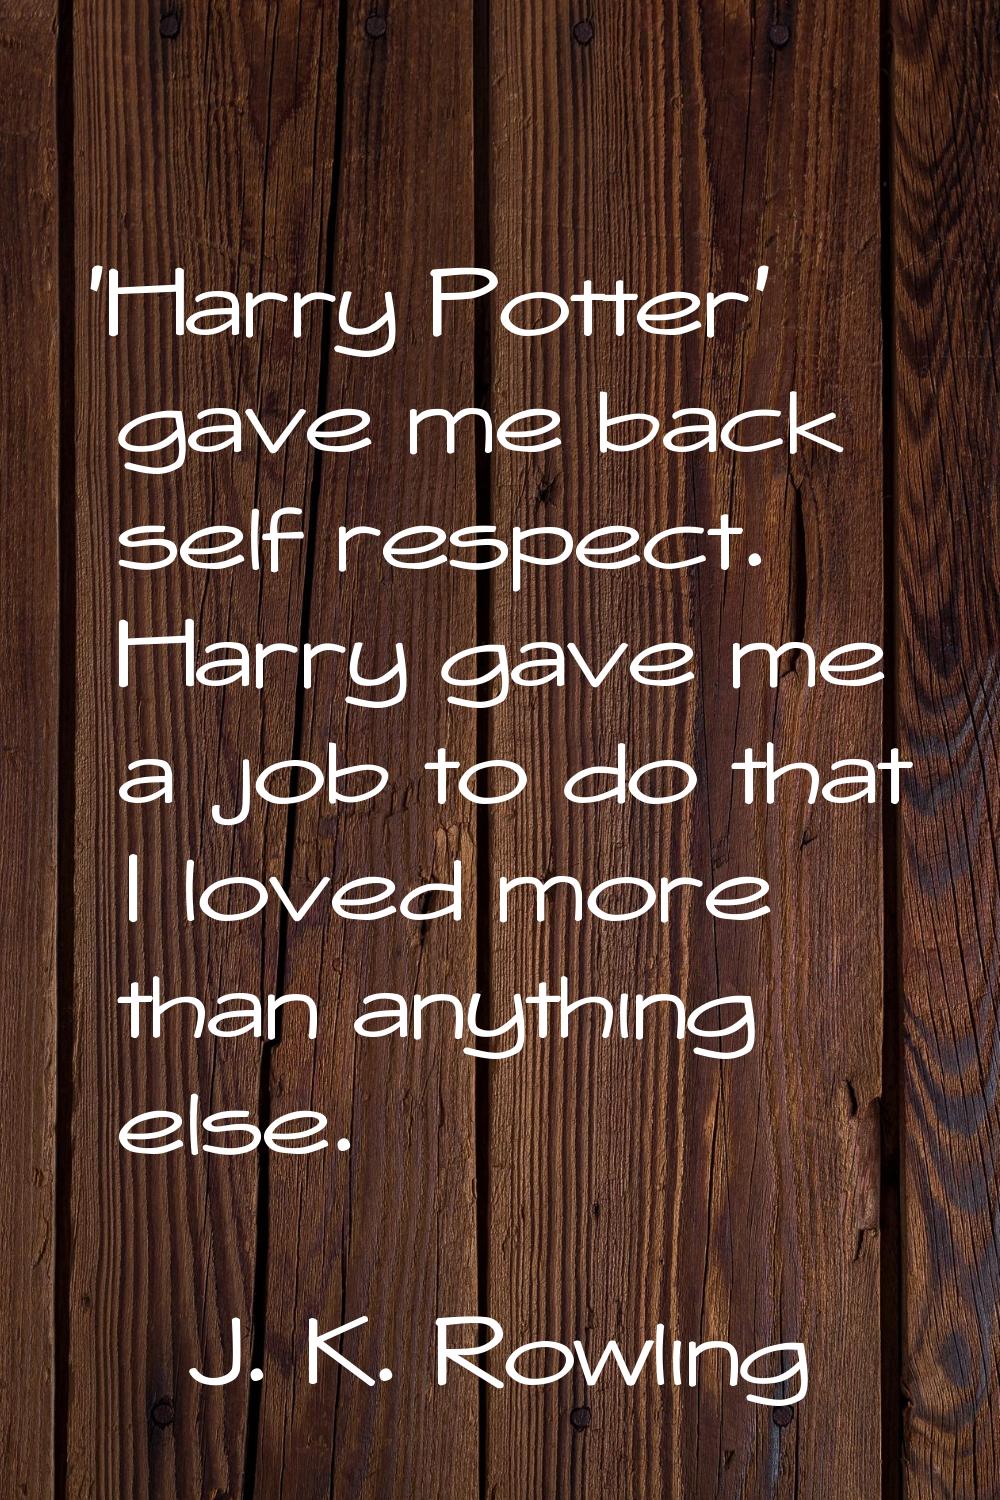 'Harry Potter' gave me back self respect. Harry gave me a job to do that I loved more than anything